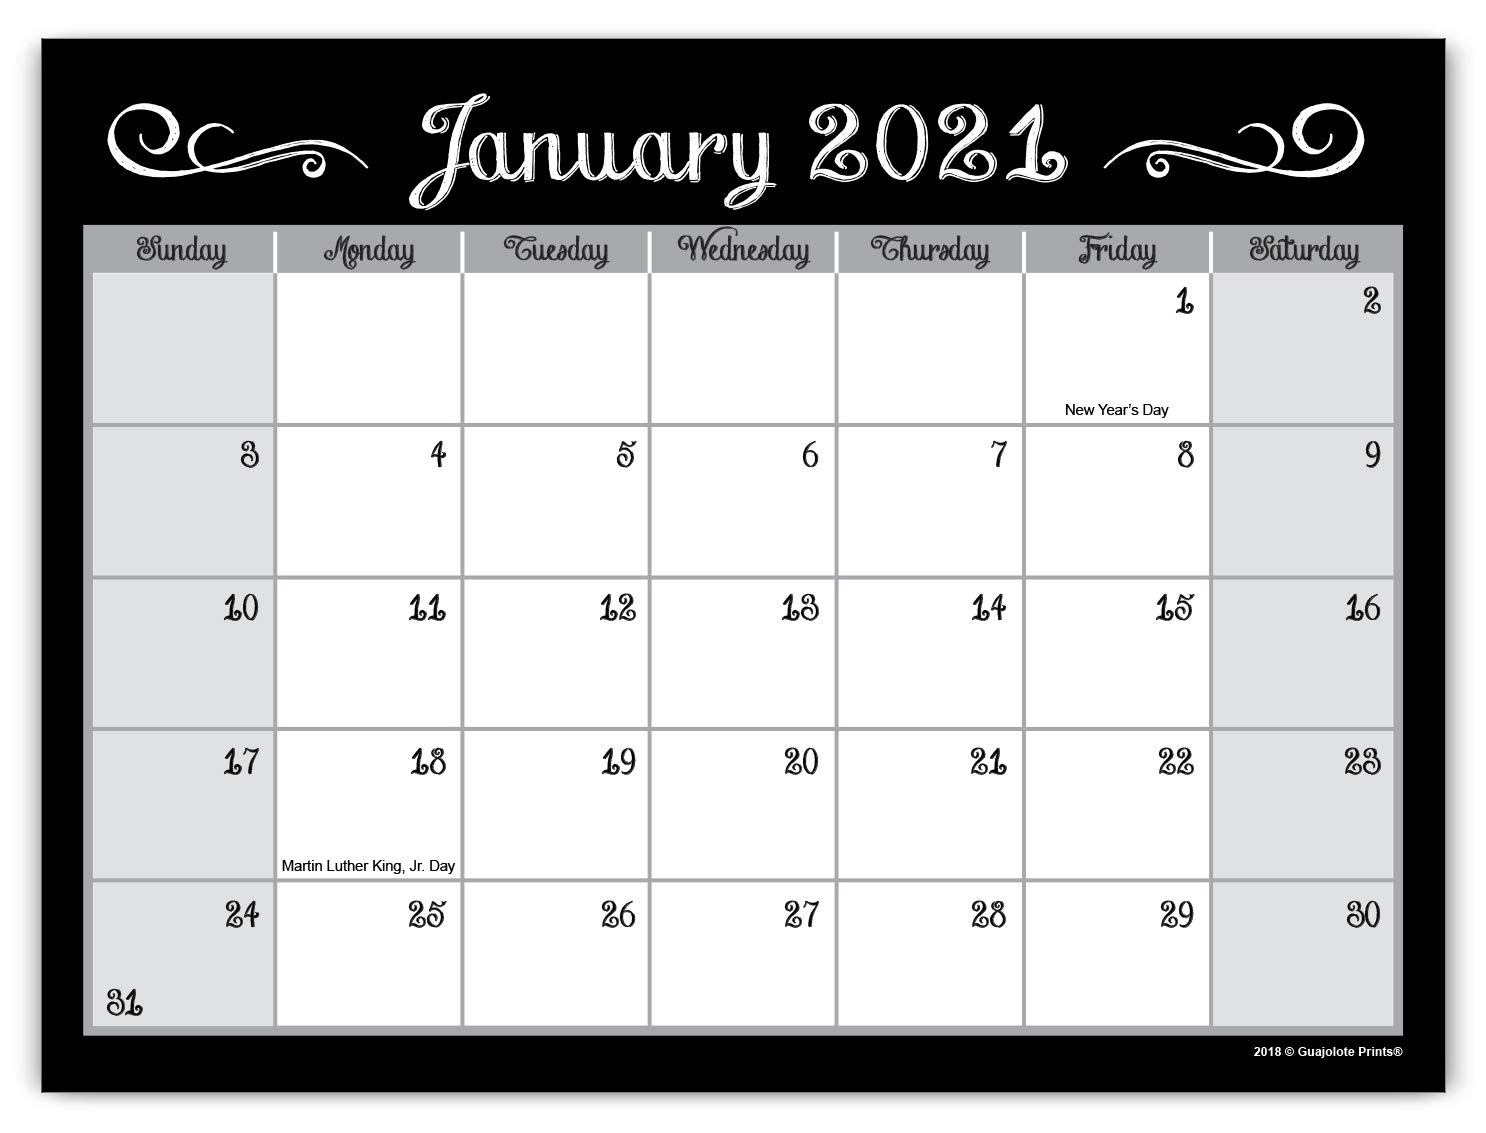 Collect Show Calendar For January 2022